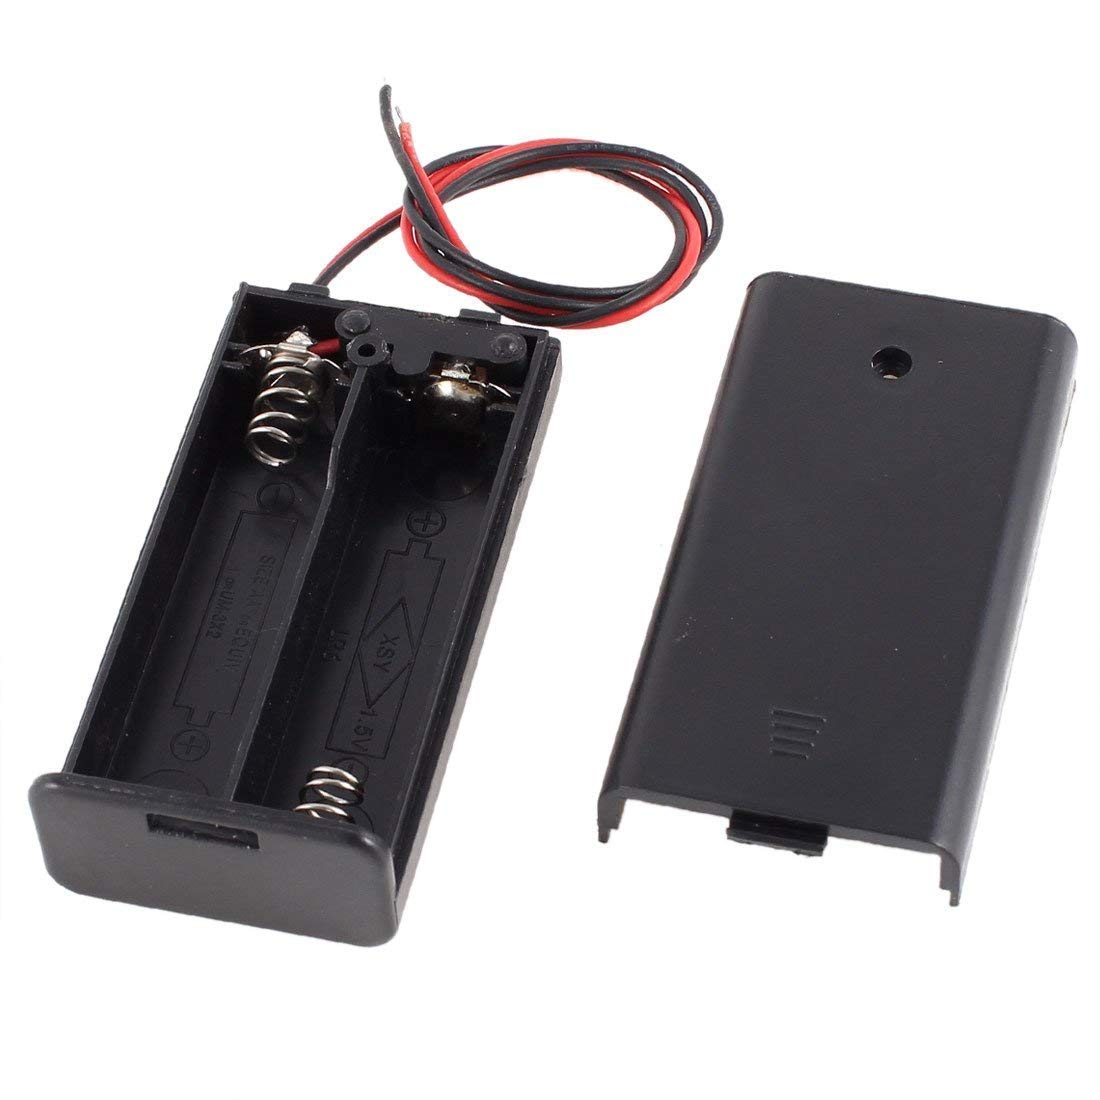 2 x AA 1.5v battery holder with cover and On/Off Switch